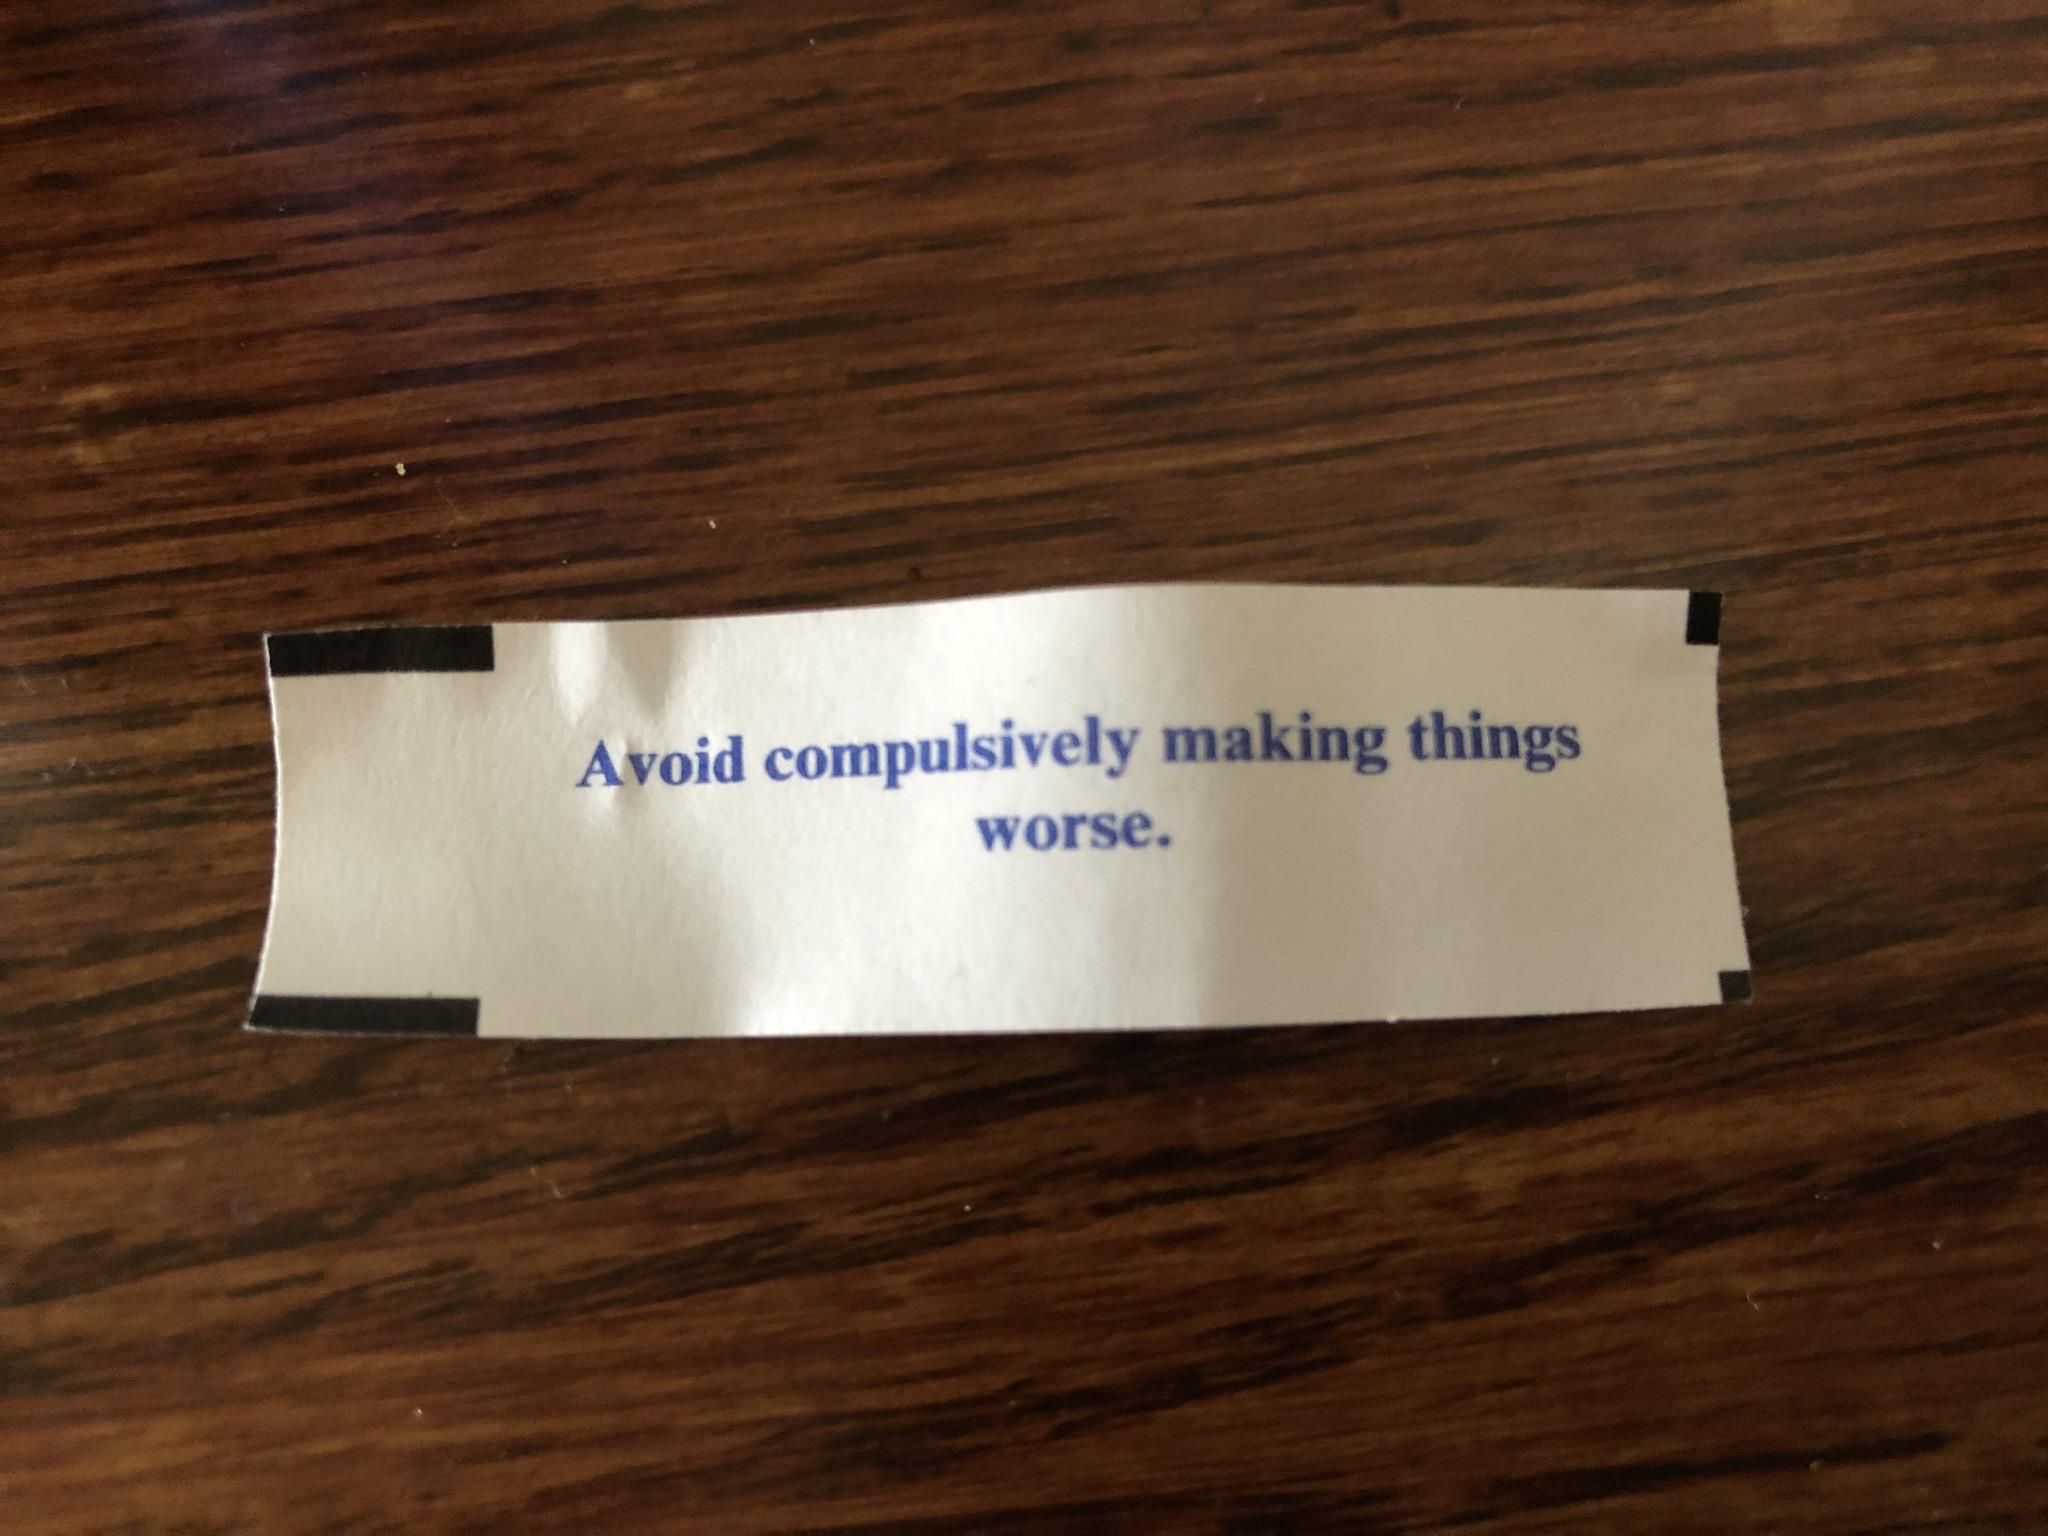 I feel strangely targeted by my fortune cookie.